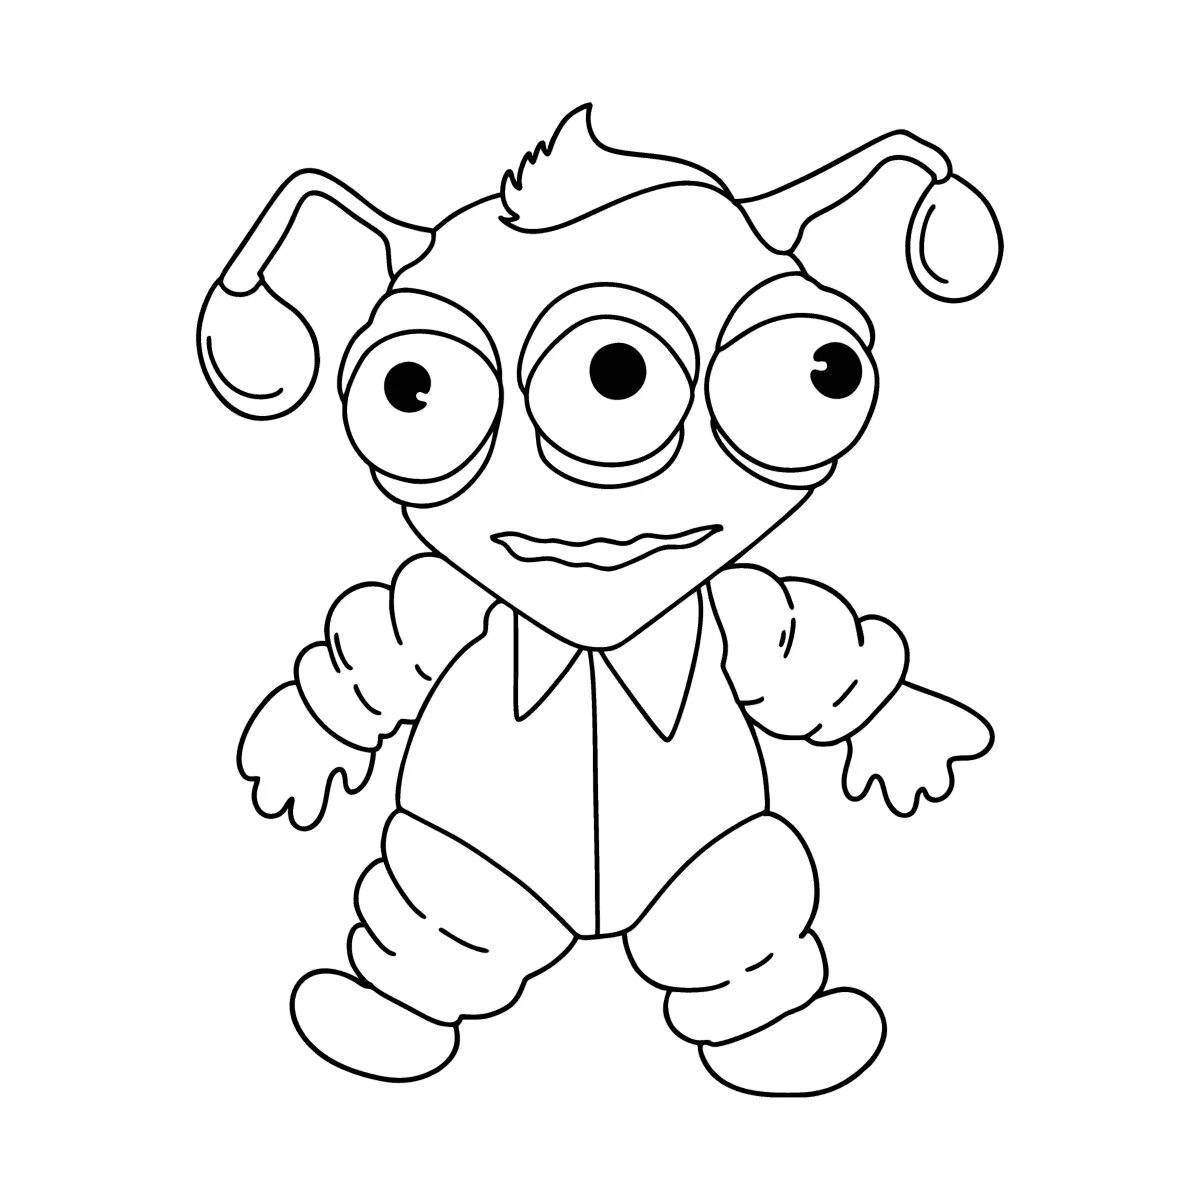 Color-blast aliens coloring page for kids